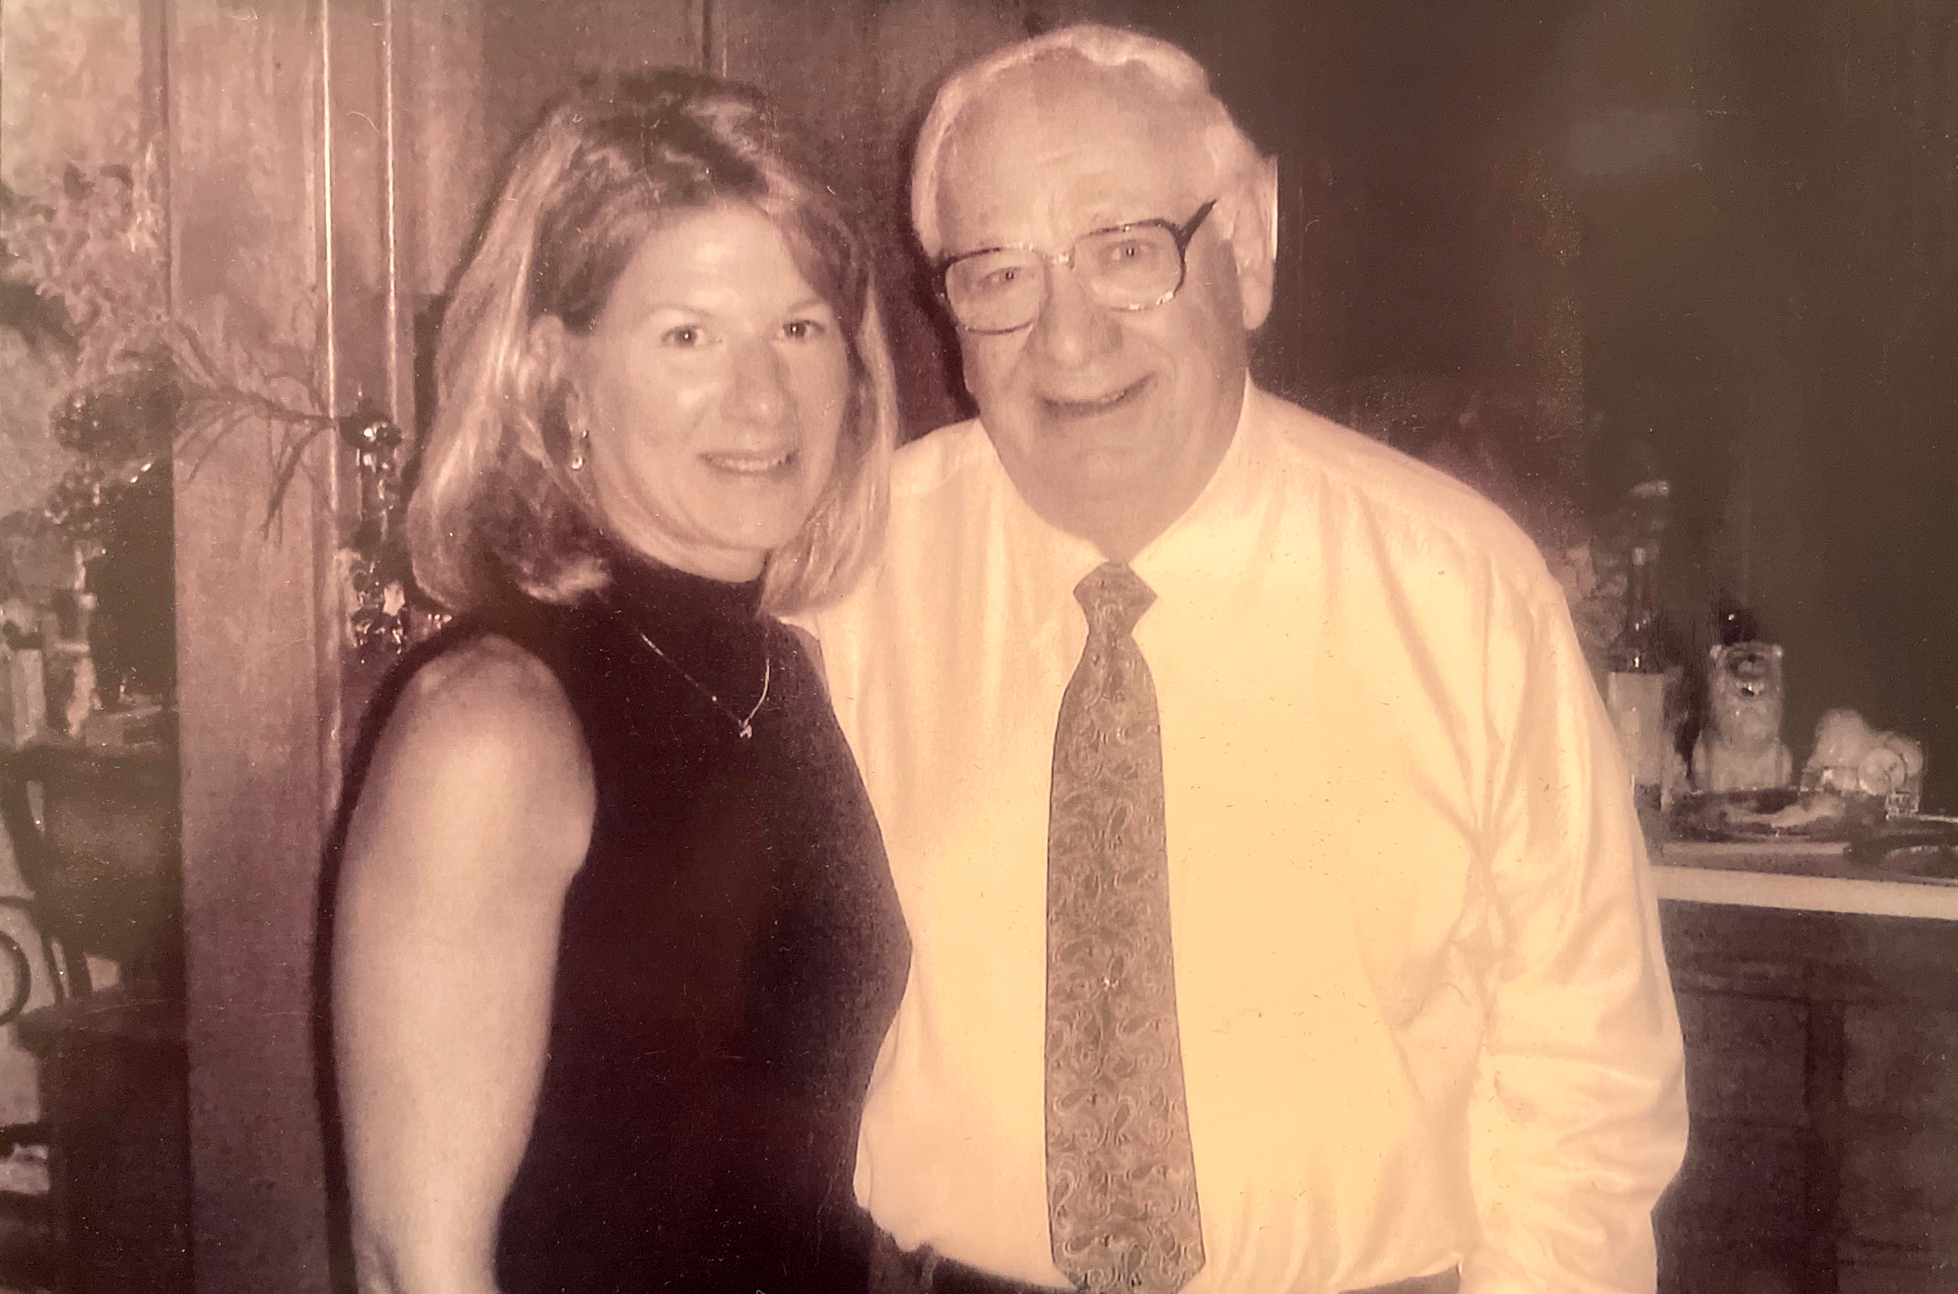 Dominick Argento's Niece, Nicki Rambeau (left) is in a black dress posing with Dominick Argento (right) wearing a white shirt with tie.